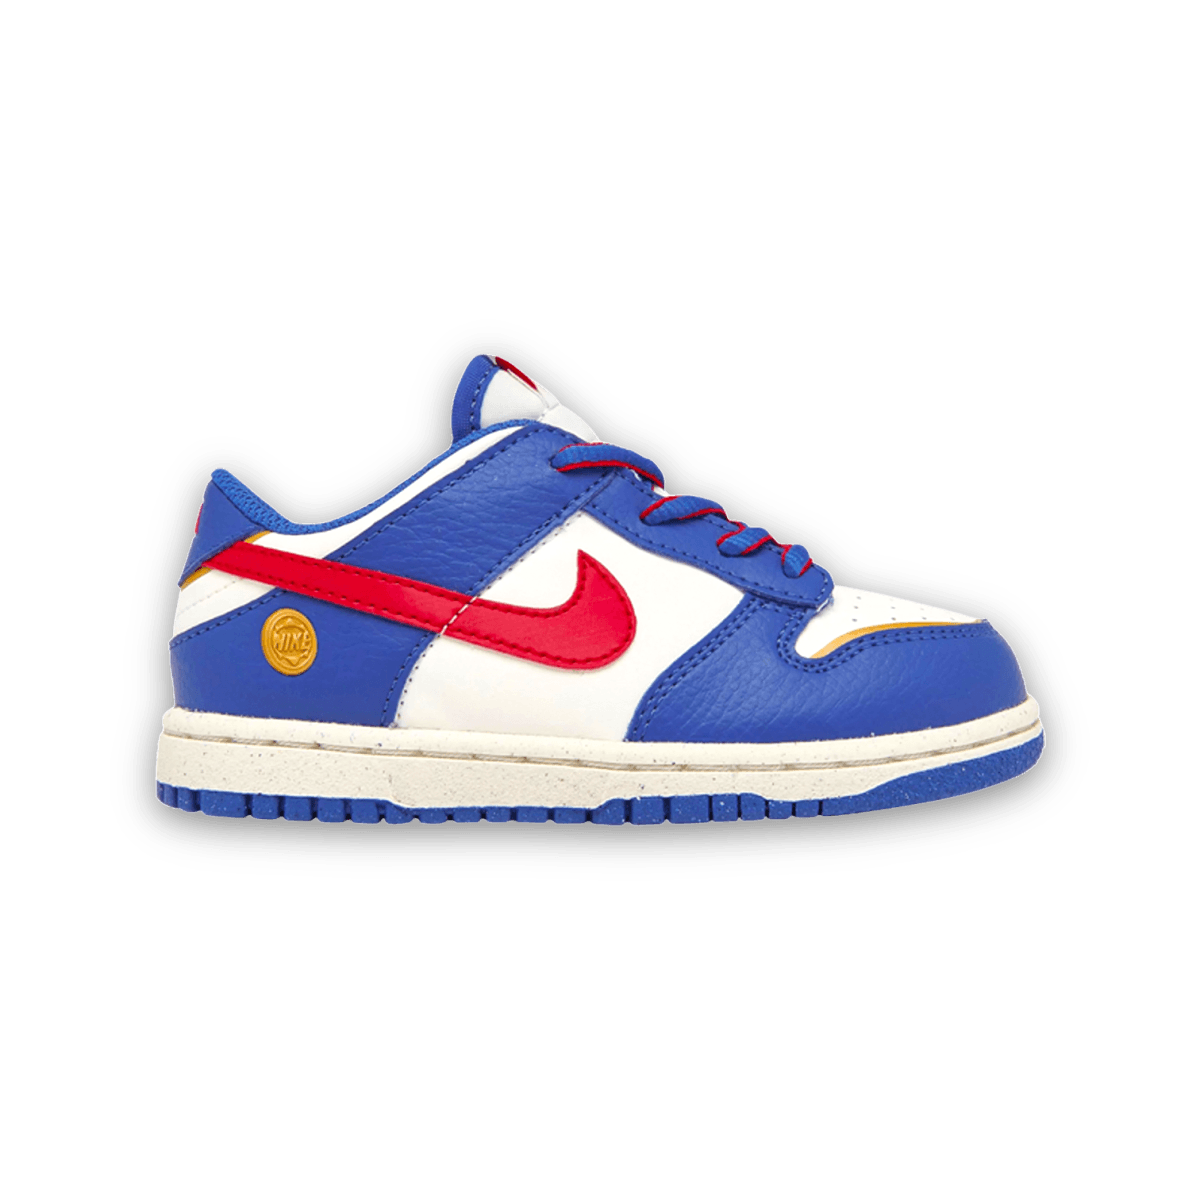 Dunk Low Next Nature TD 'Superhero' - Toddler - Low Sneaker - Dunks - Jawns on Fire